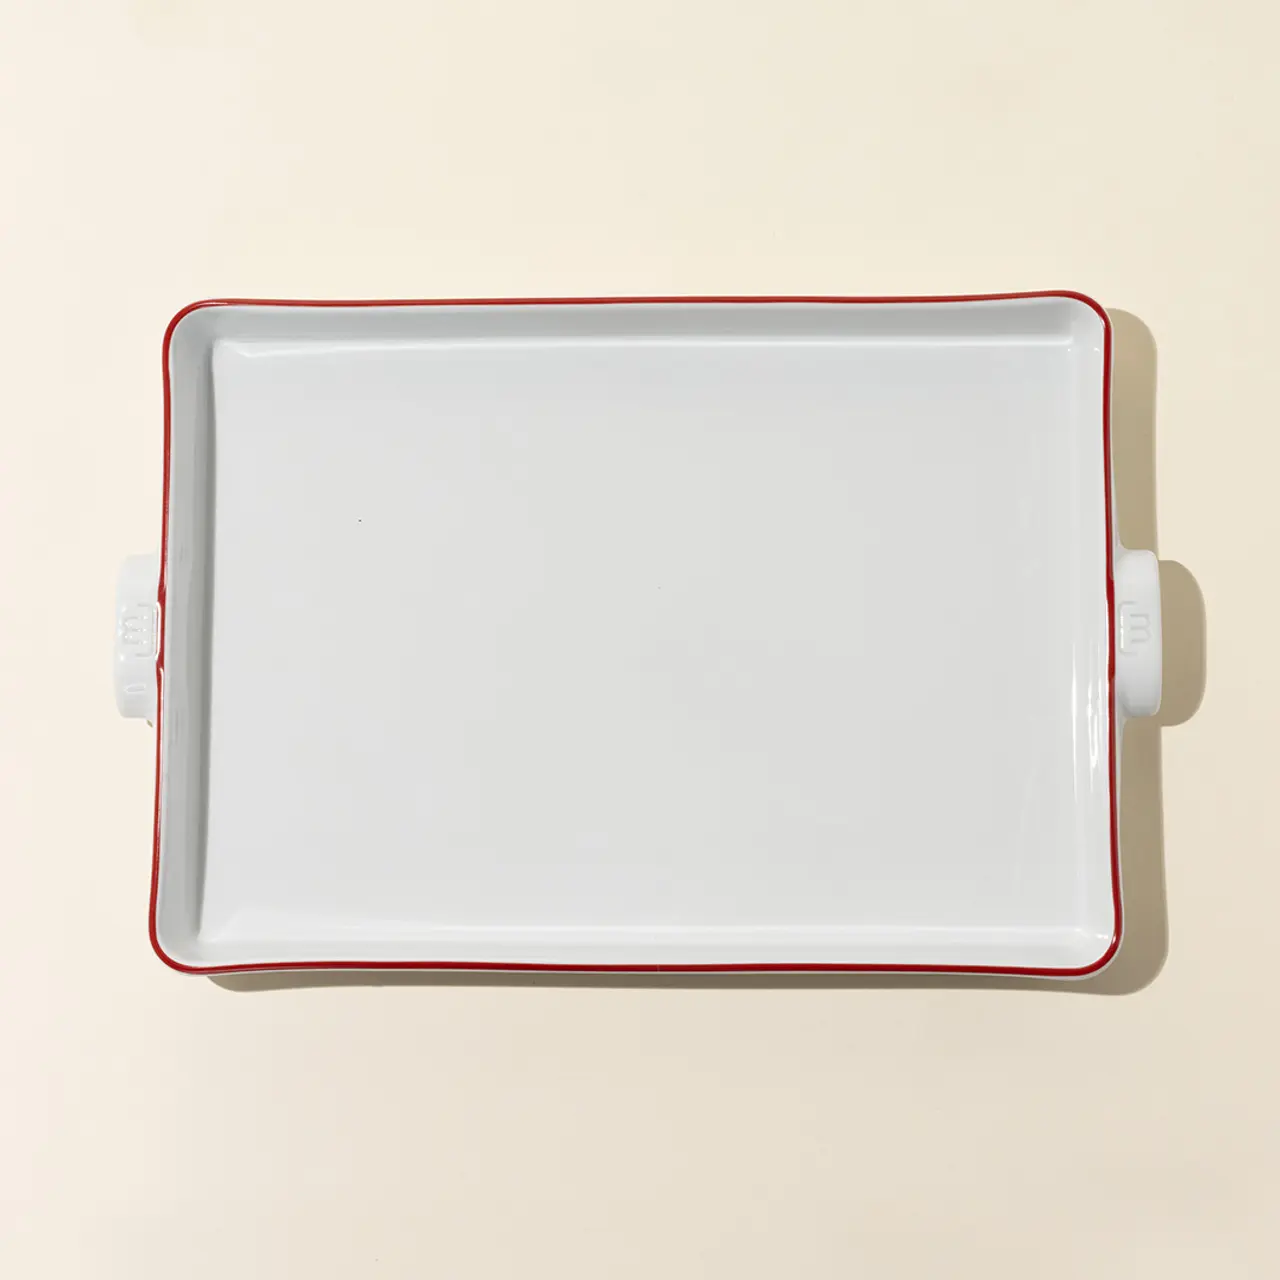 A white square ceramic baking dish with red trim sits on a beige surface.